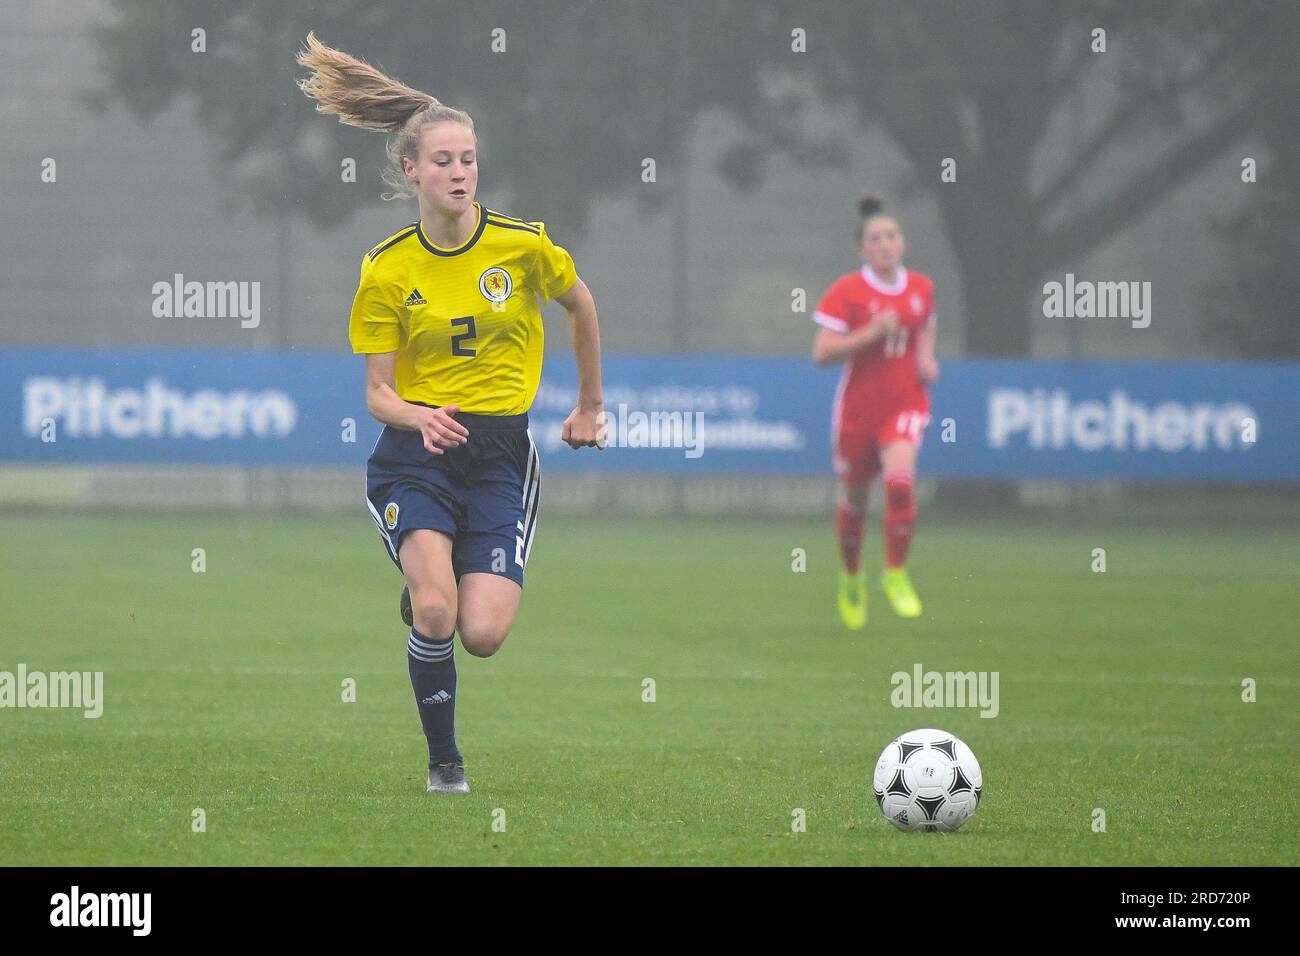 Newport, Wales. 23 October 2019. Georgia Gray of Scotland in action during the Under 15 Girls Friendly International match between Wales and Scotland at Dragon Park in Newport, Wales, UK on 23 October 2019. Credit: Duncan Thomas/Majestic Media. Stock Photo